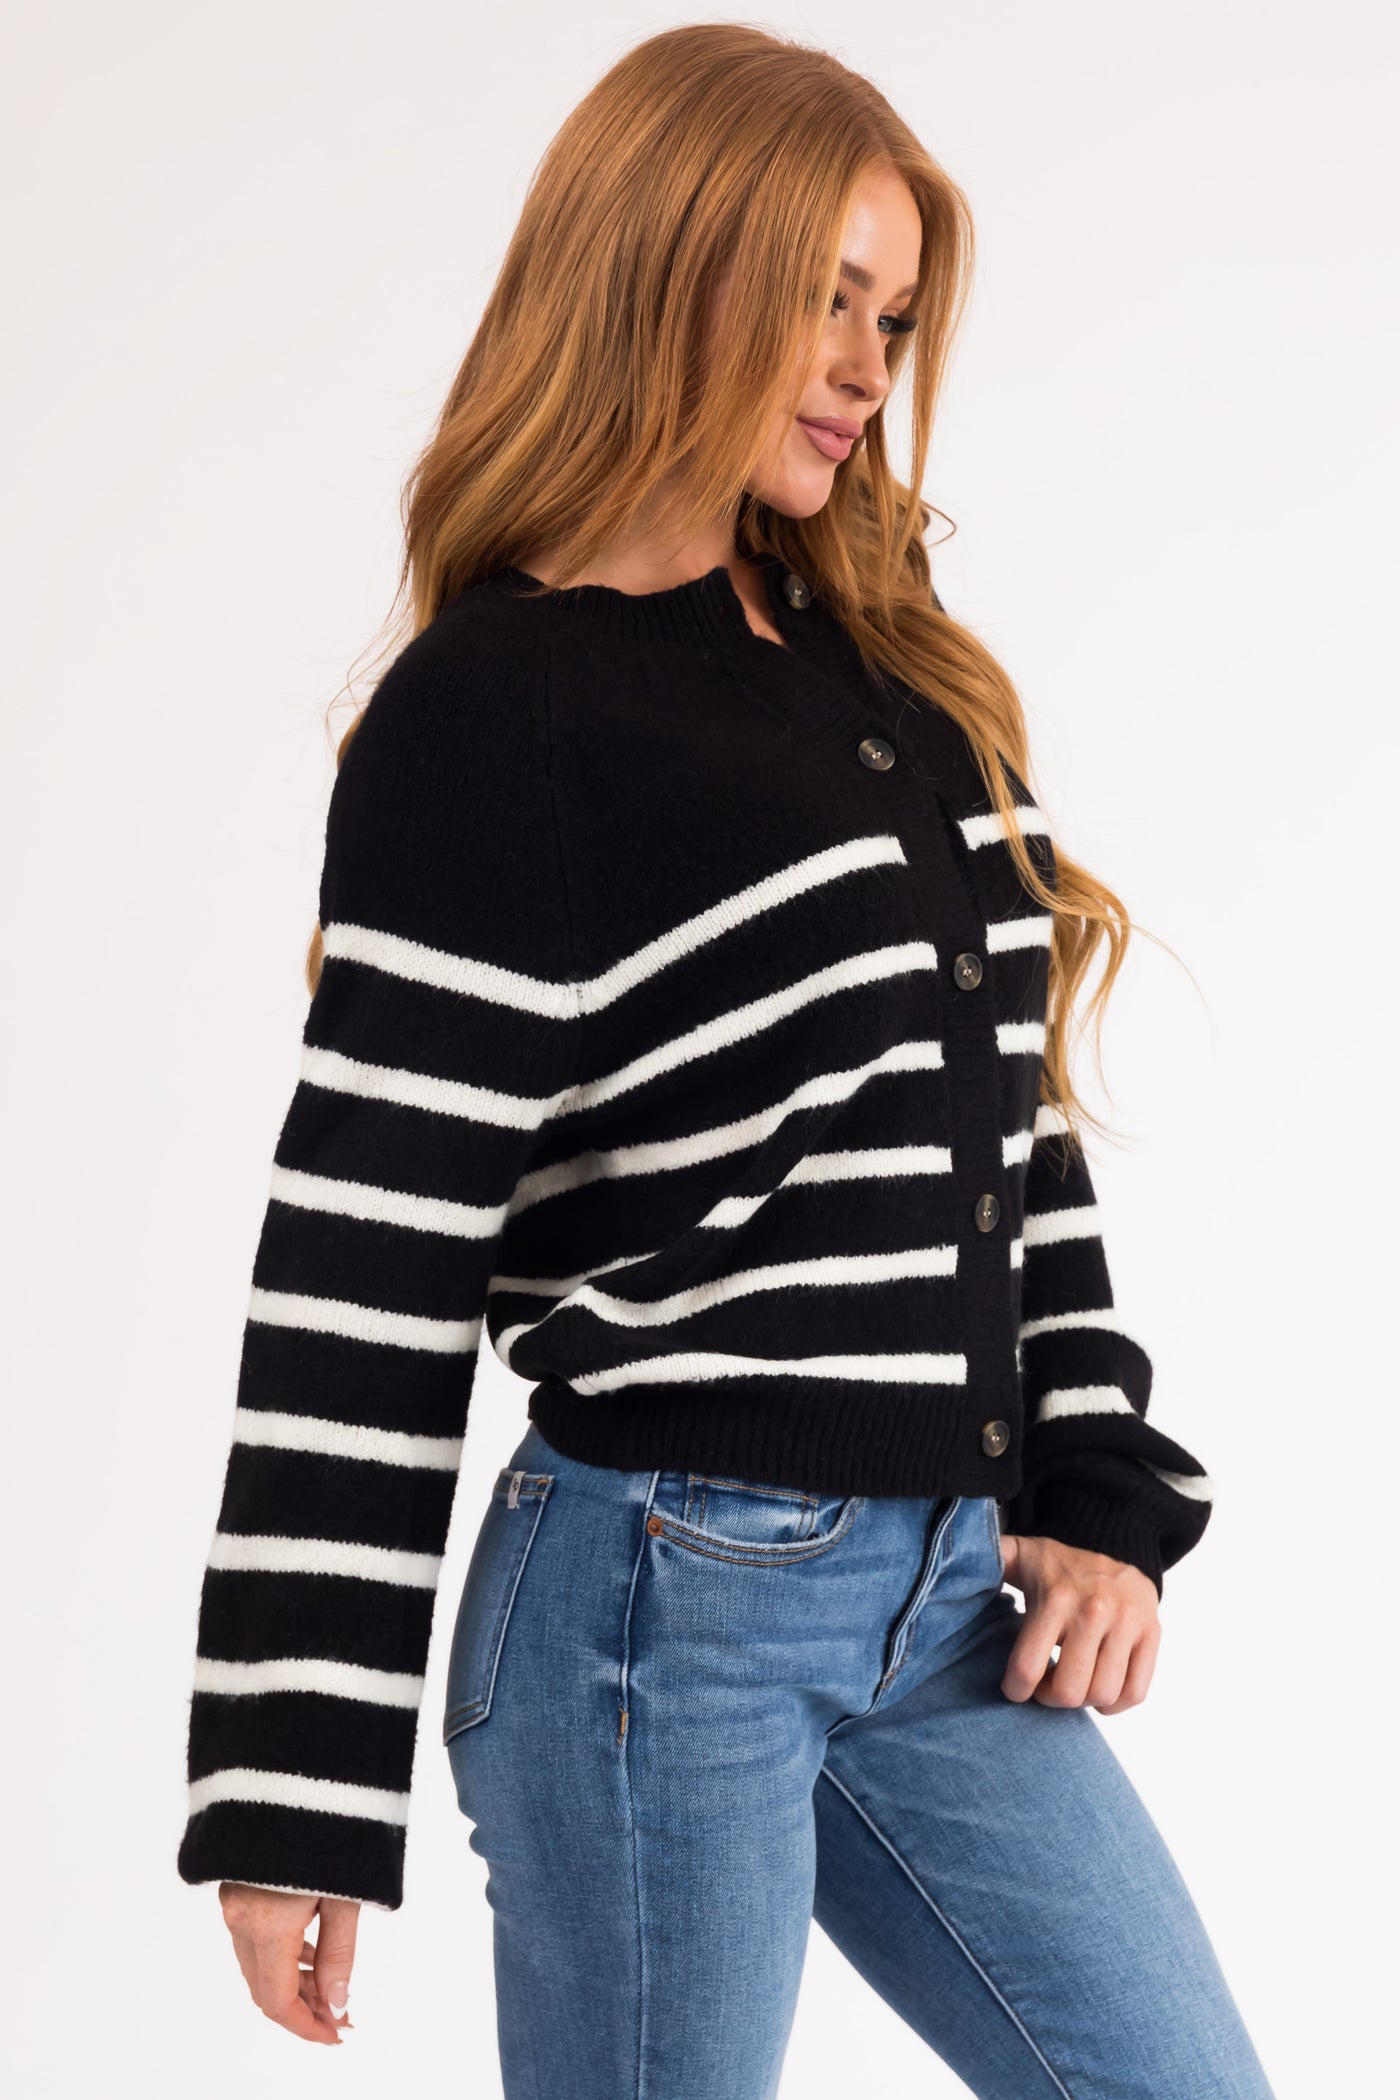 Black and White Striped Button Down Cardigan